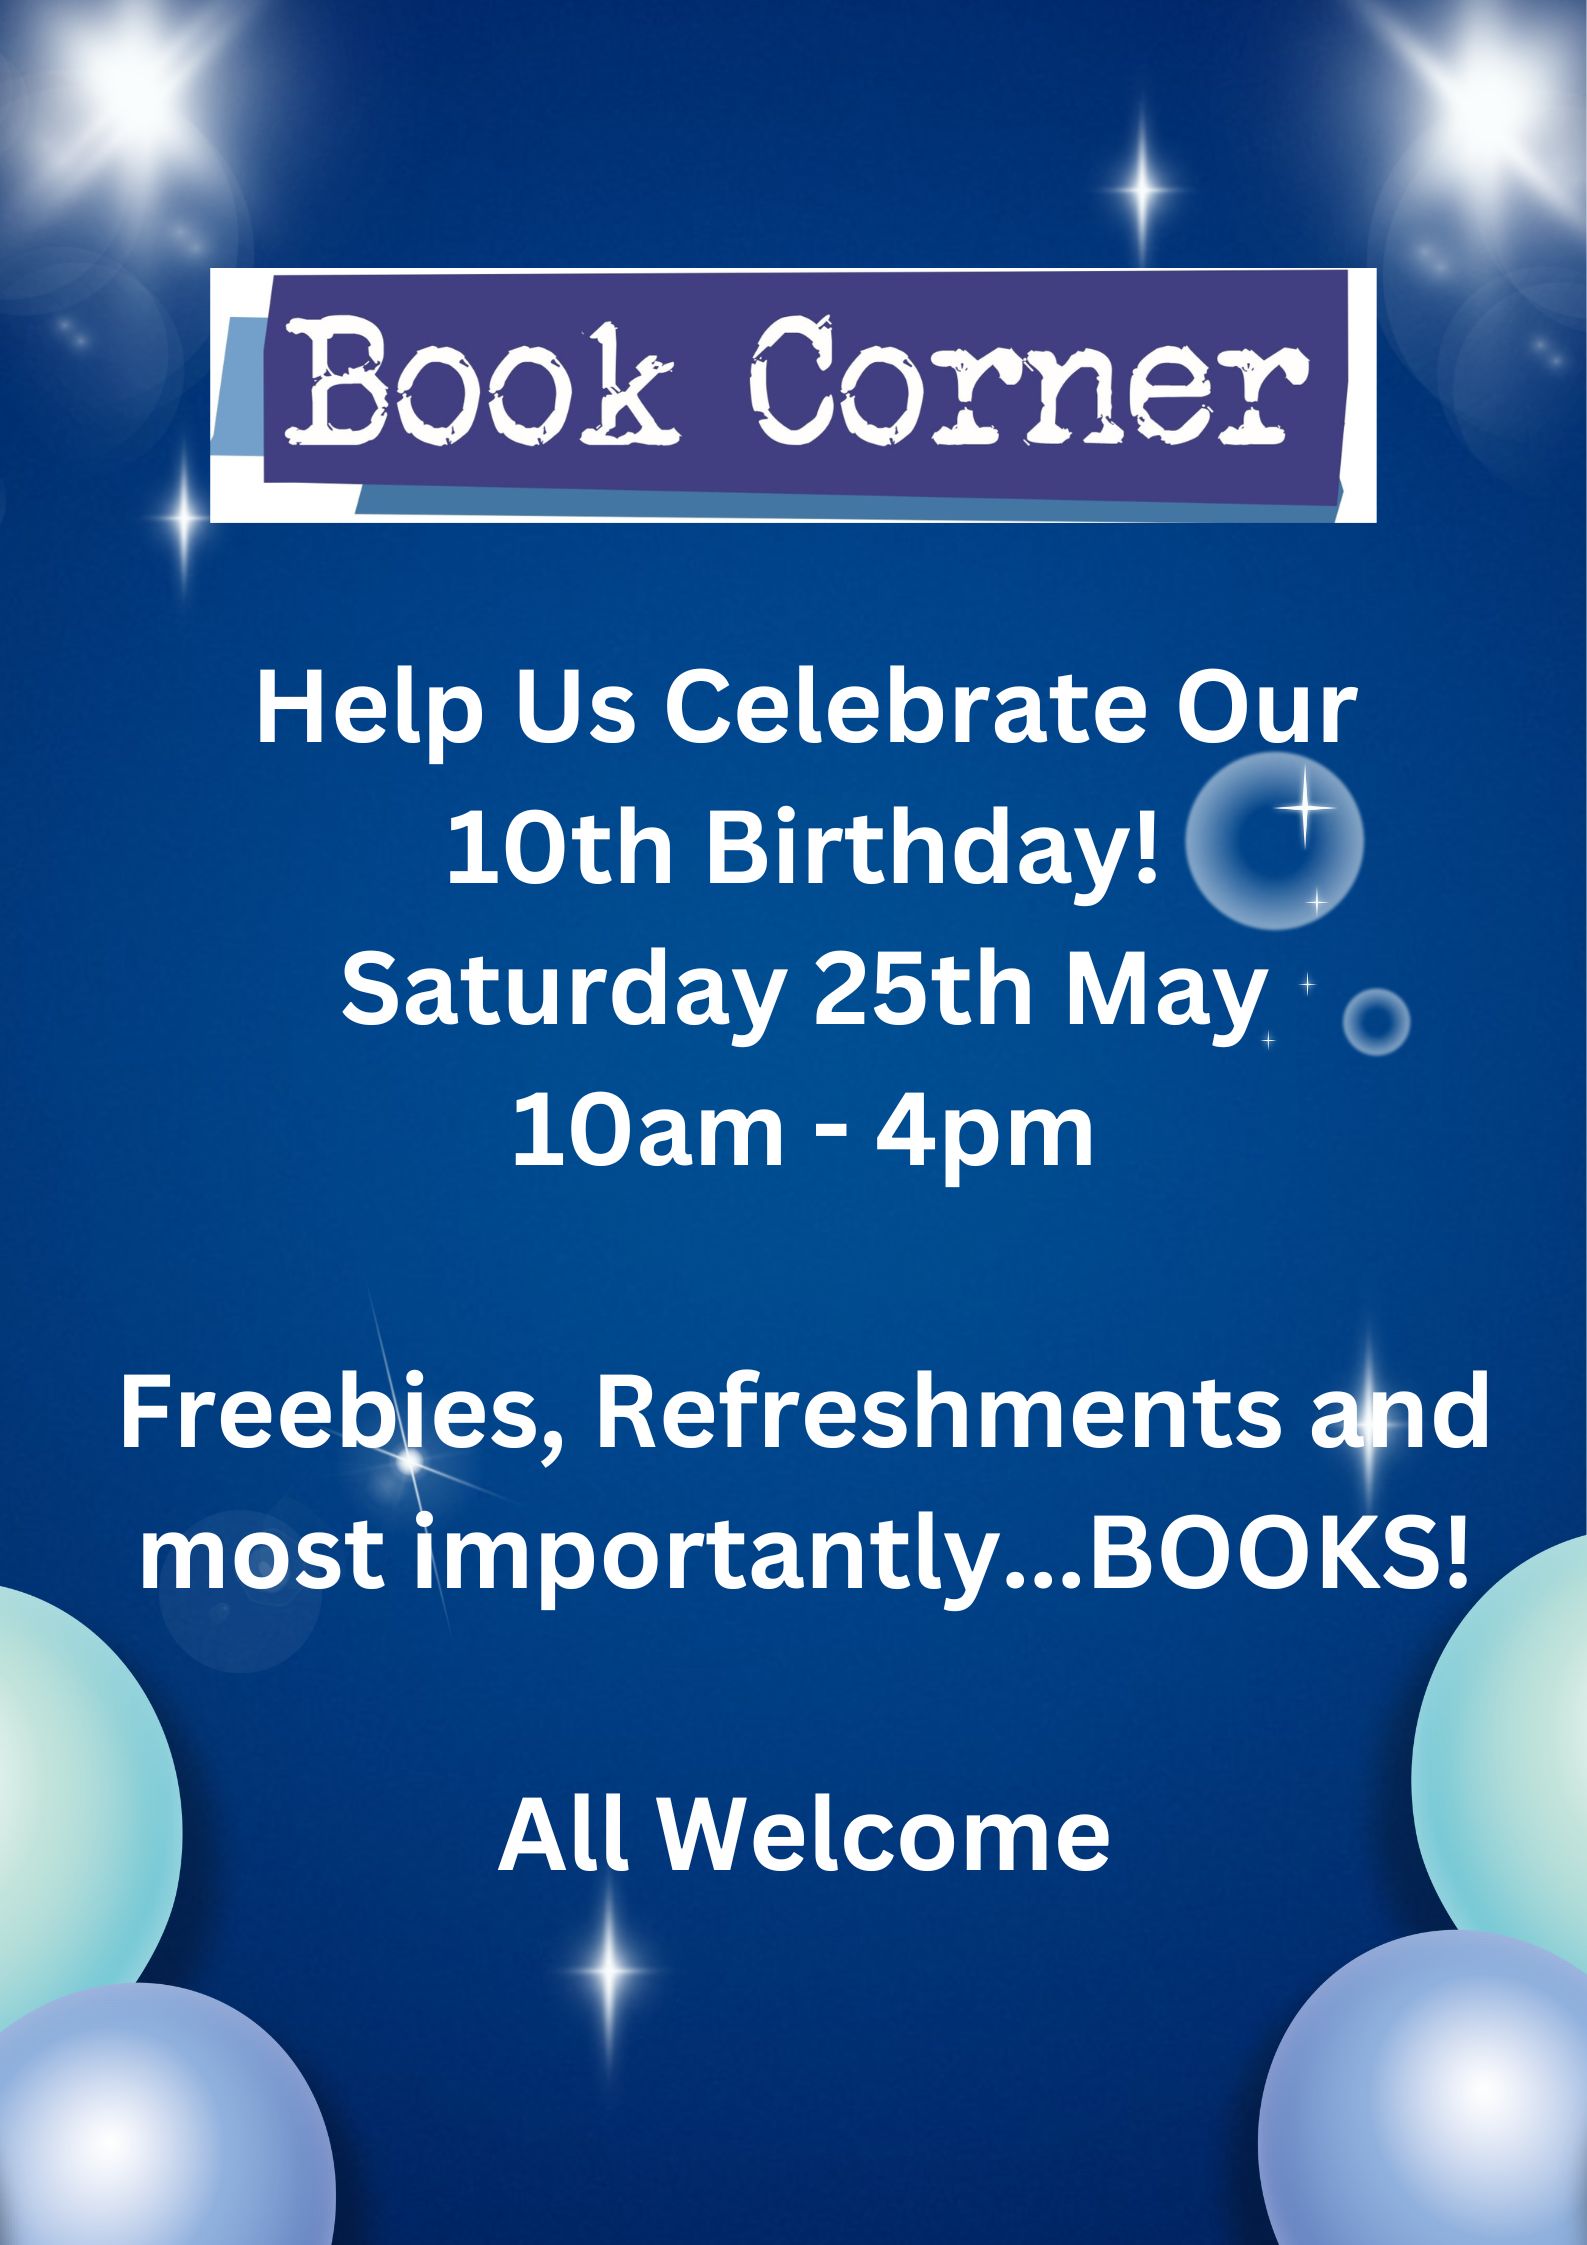 A blue poster featuring birthday balloons and the Book Corner logo. The text reads: Help us celebrate our 10th birthday! Saturday 25th May 10am to 4pm. Freebies, refreshments and most importantly books! All welcome